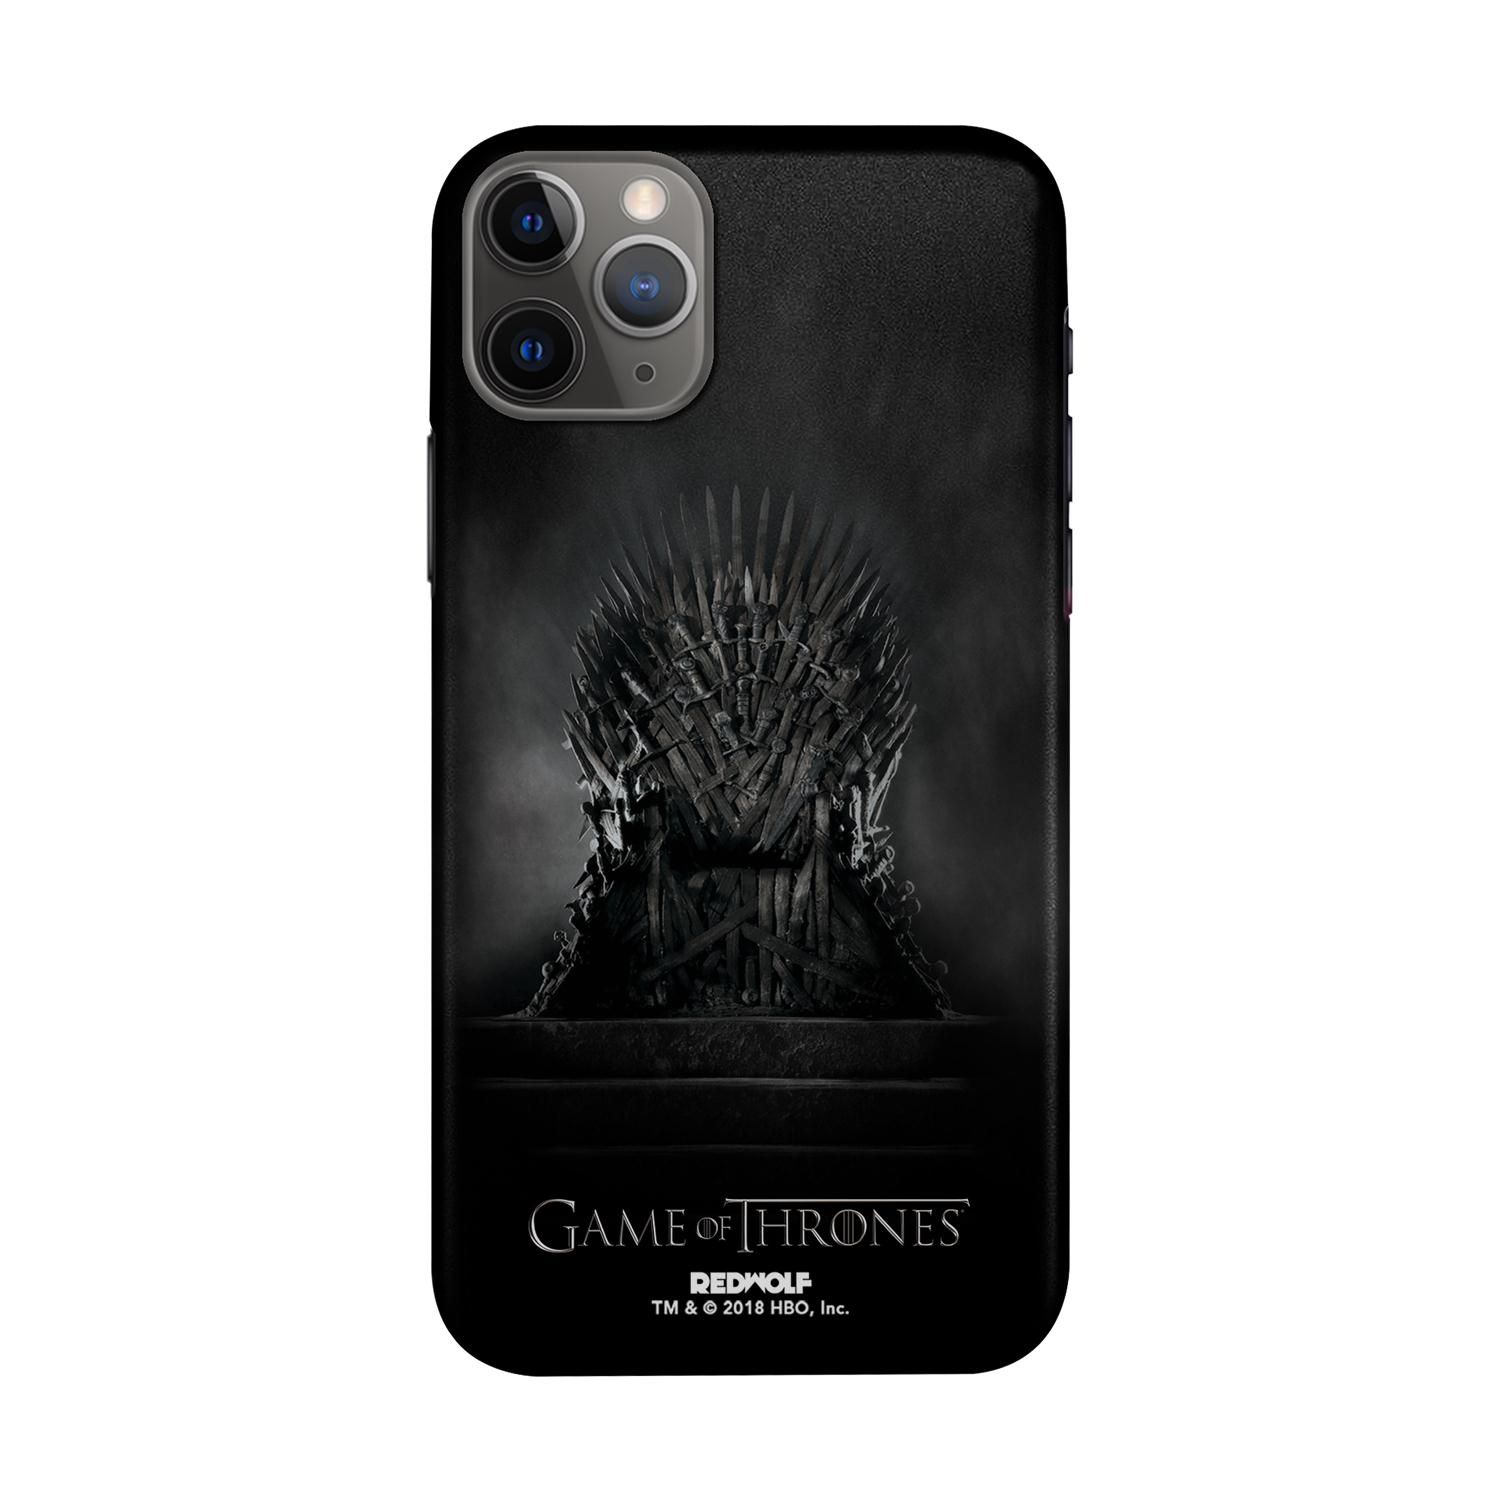 Buy The Throne - Sleek Phone Case for iPhone 11 Pro Max Online